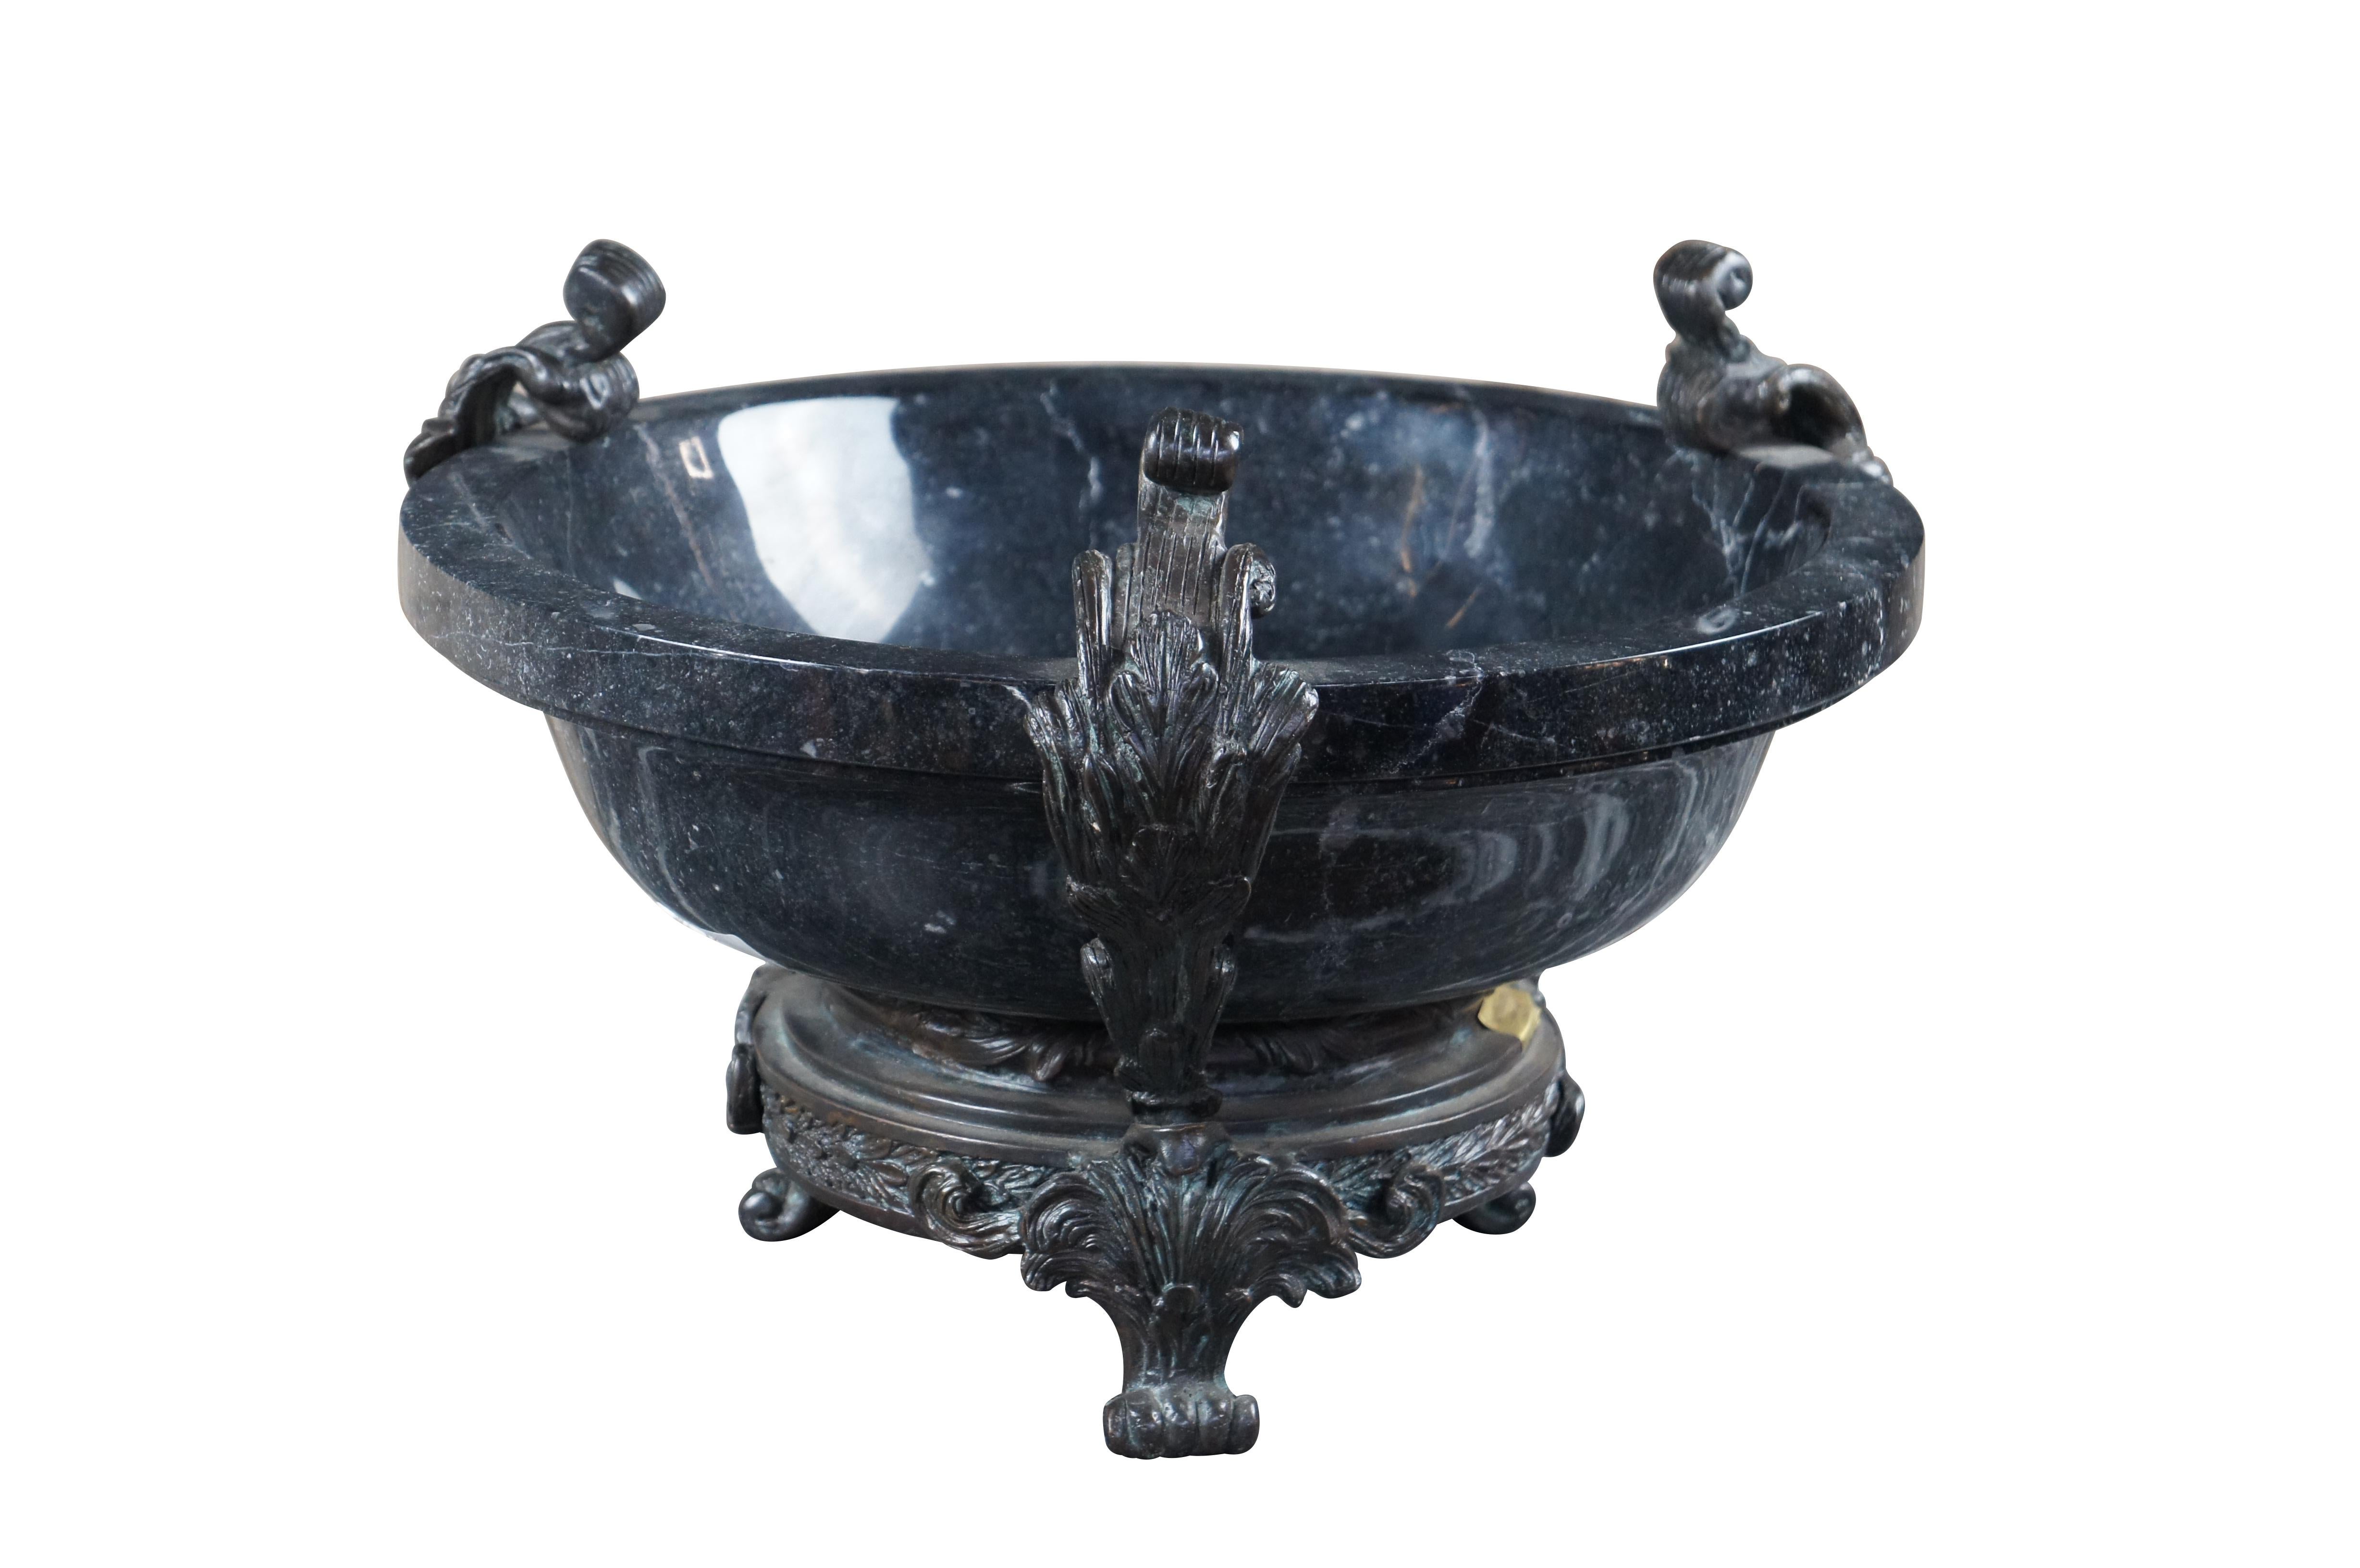 An impressive black marble and brass Tazza by Maitland Smith, circa 1990s. Features a marble bowl on a brass footed stand with neoclassical relief. Makers mark along side of base.

Dimensions:
16.5 x 16.5